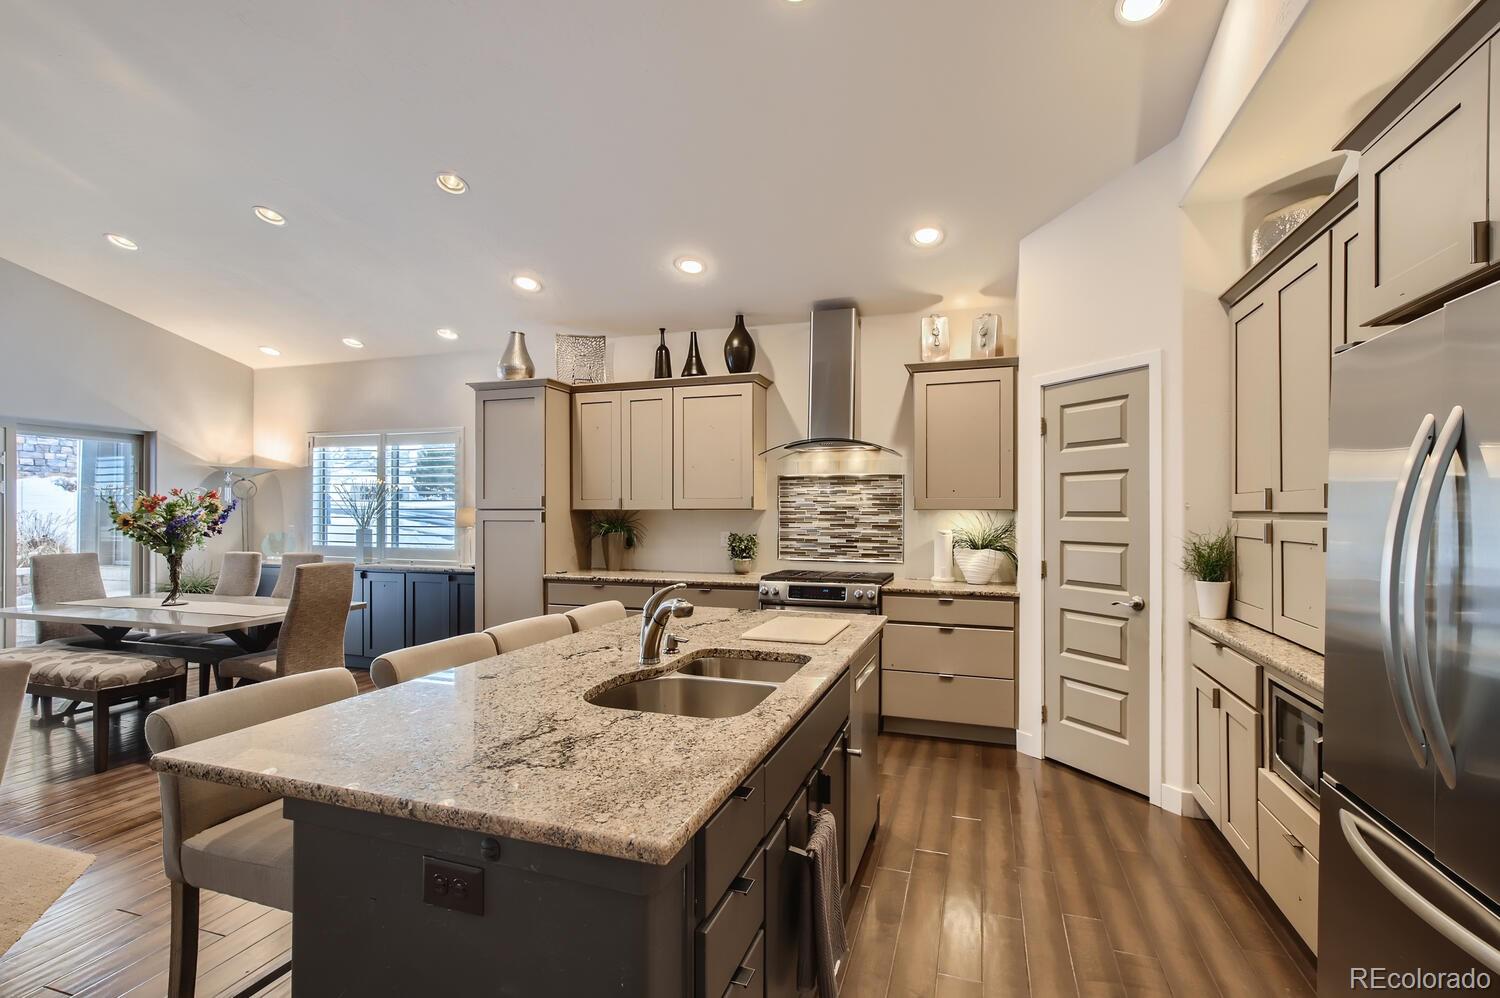 a kitchen with a center island appliances and cabinets